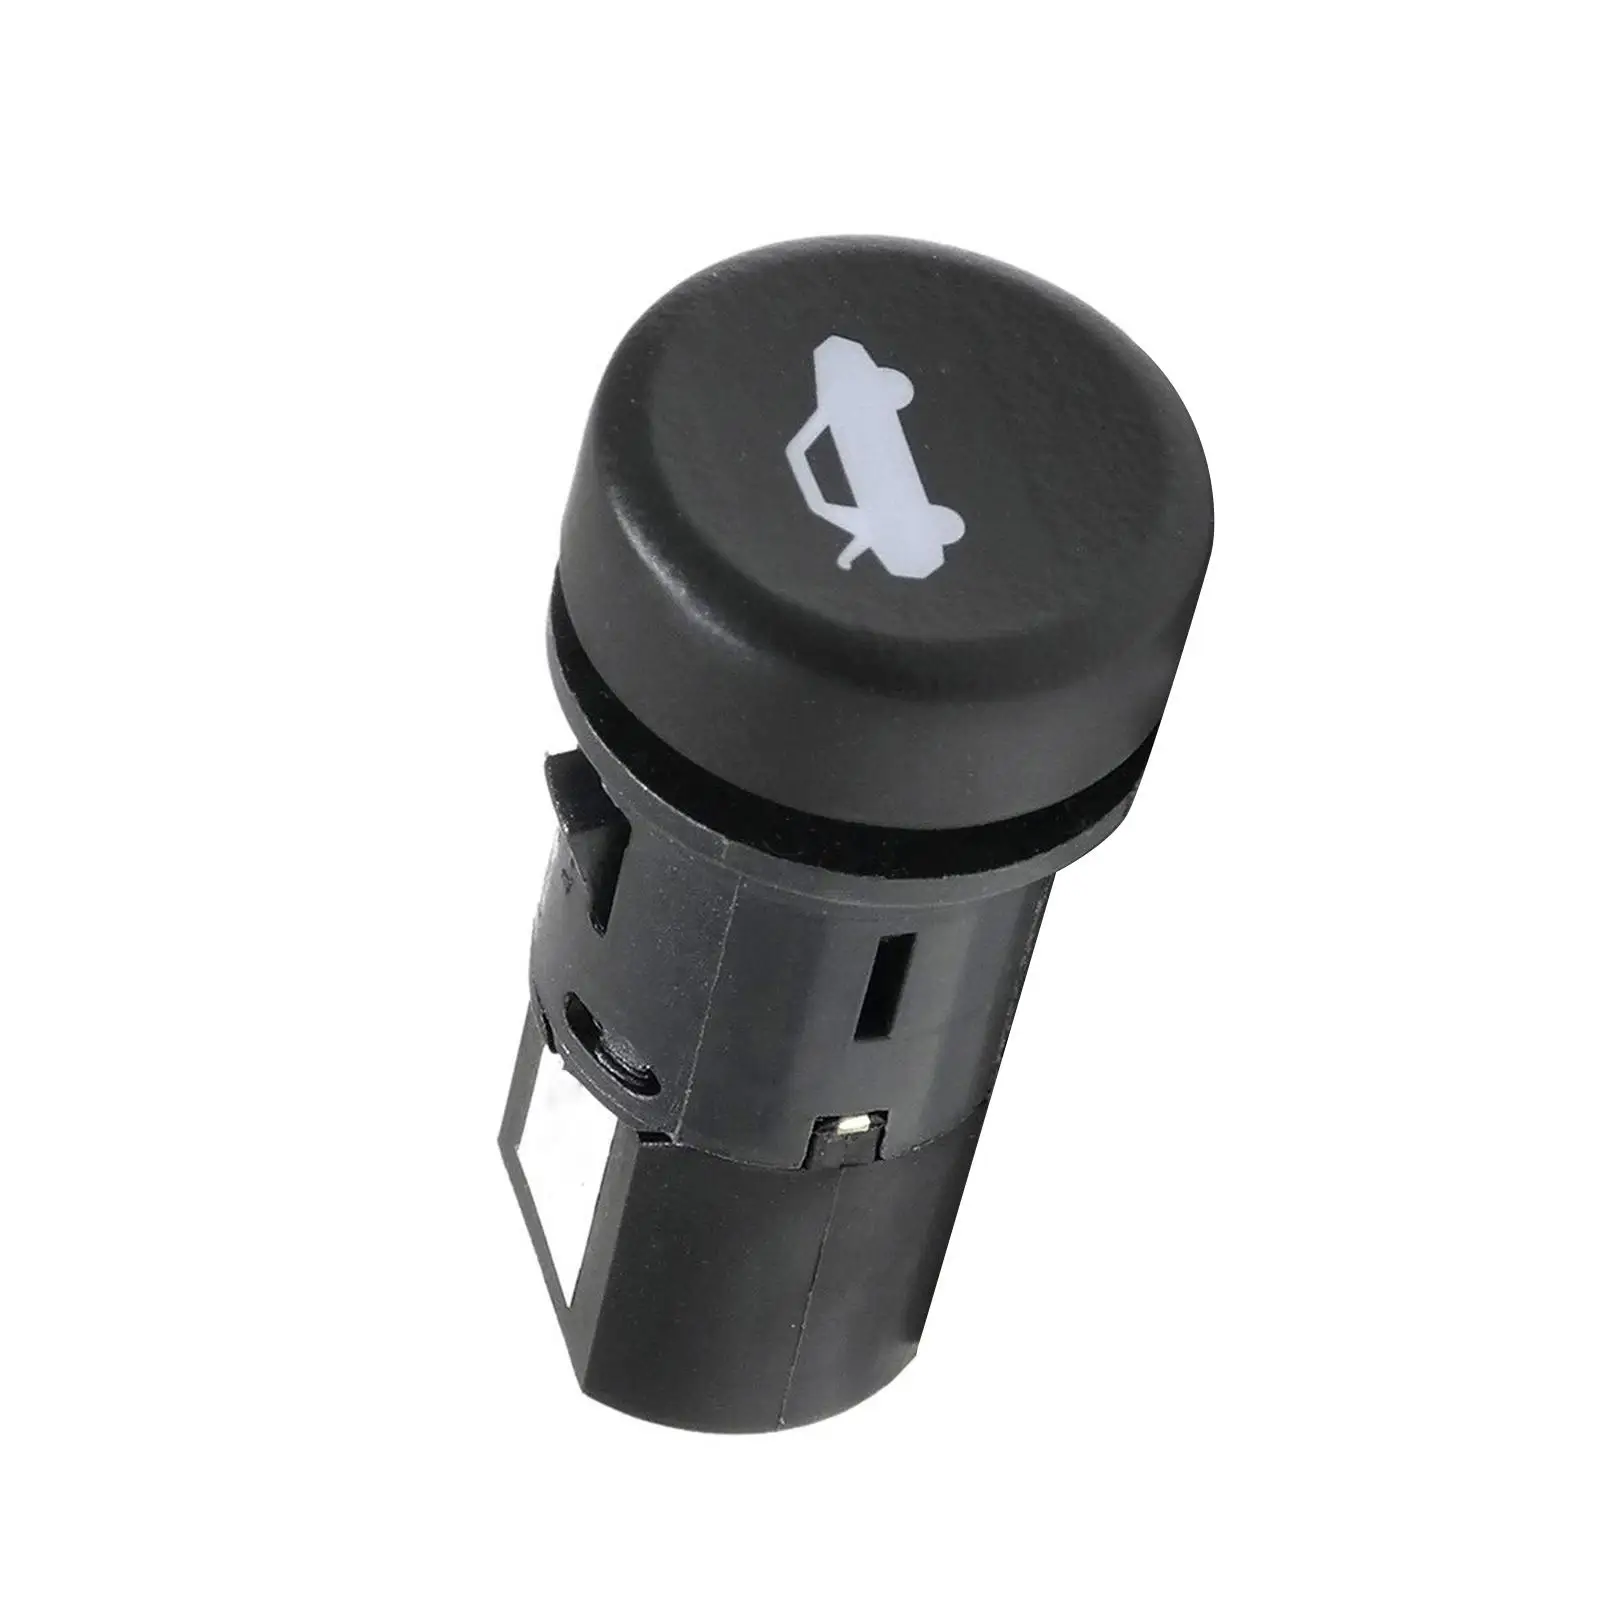 Trunk Lid Release Switch Button Direct Replaces 92224594 Trunk Lid Release Switch for Camaro Good Performance Easy Installation